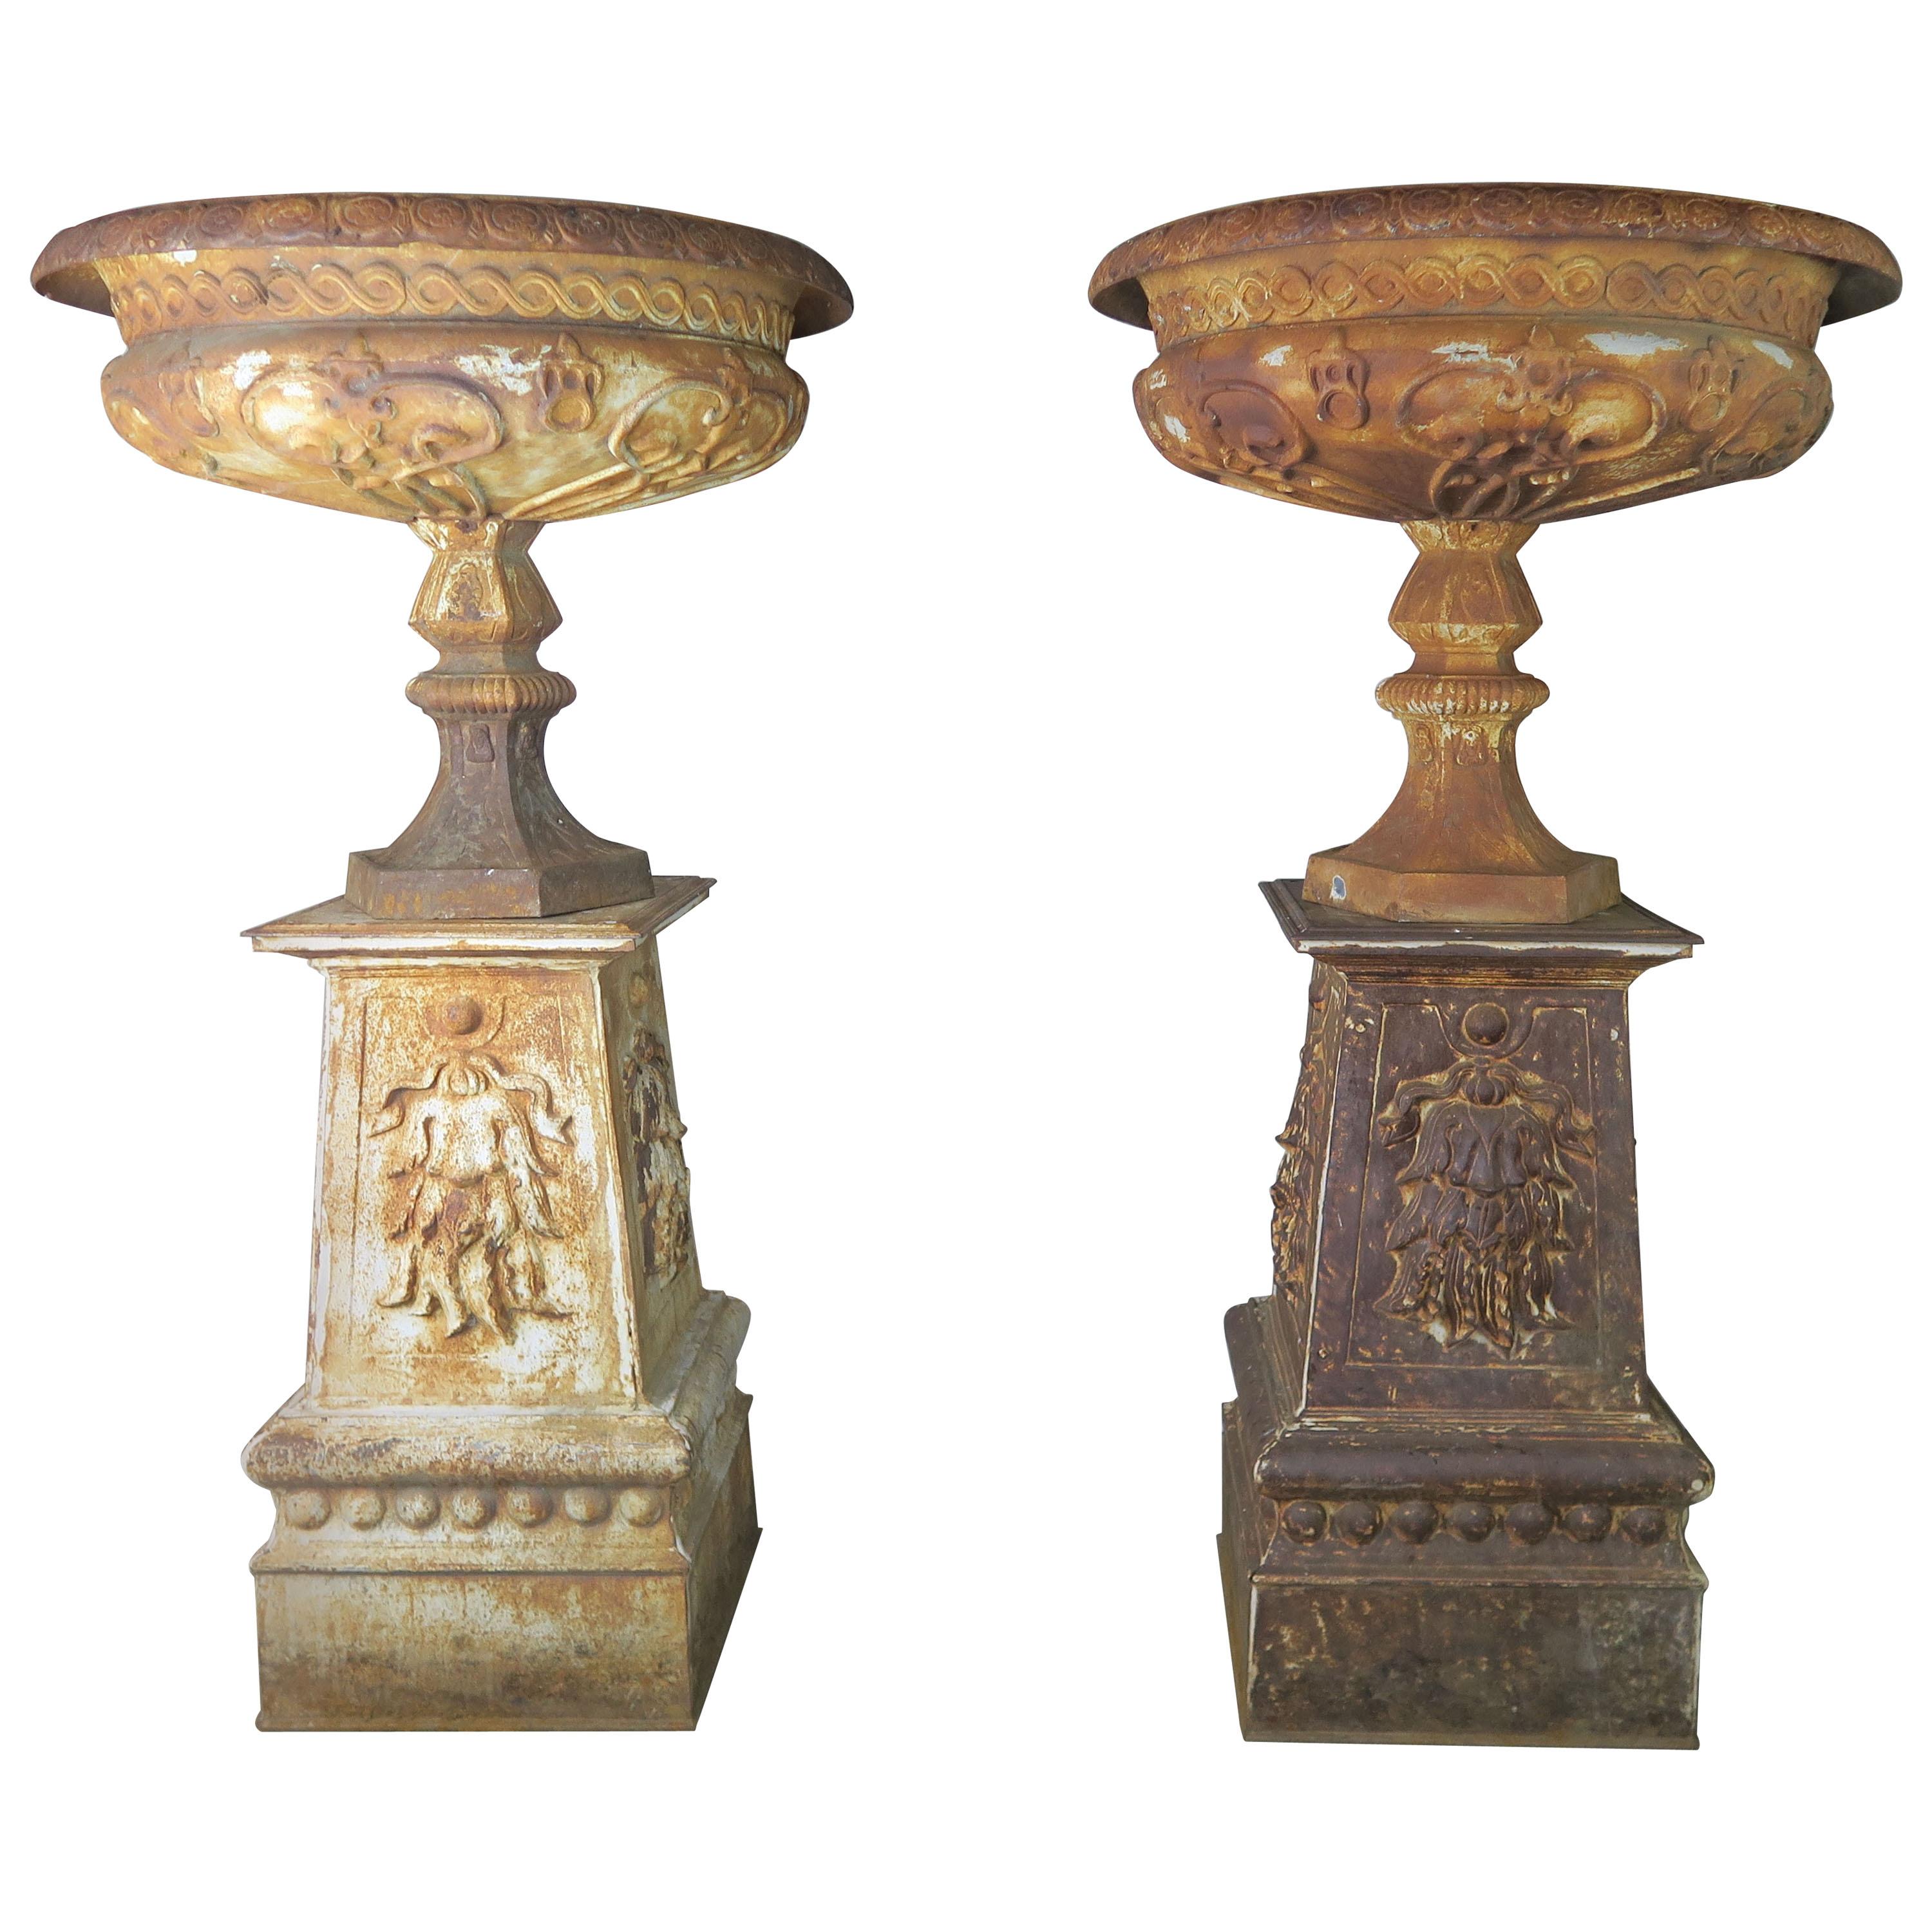 19th Century Monumental French Cast Iron Urns on Bases